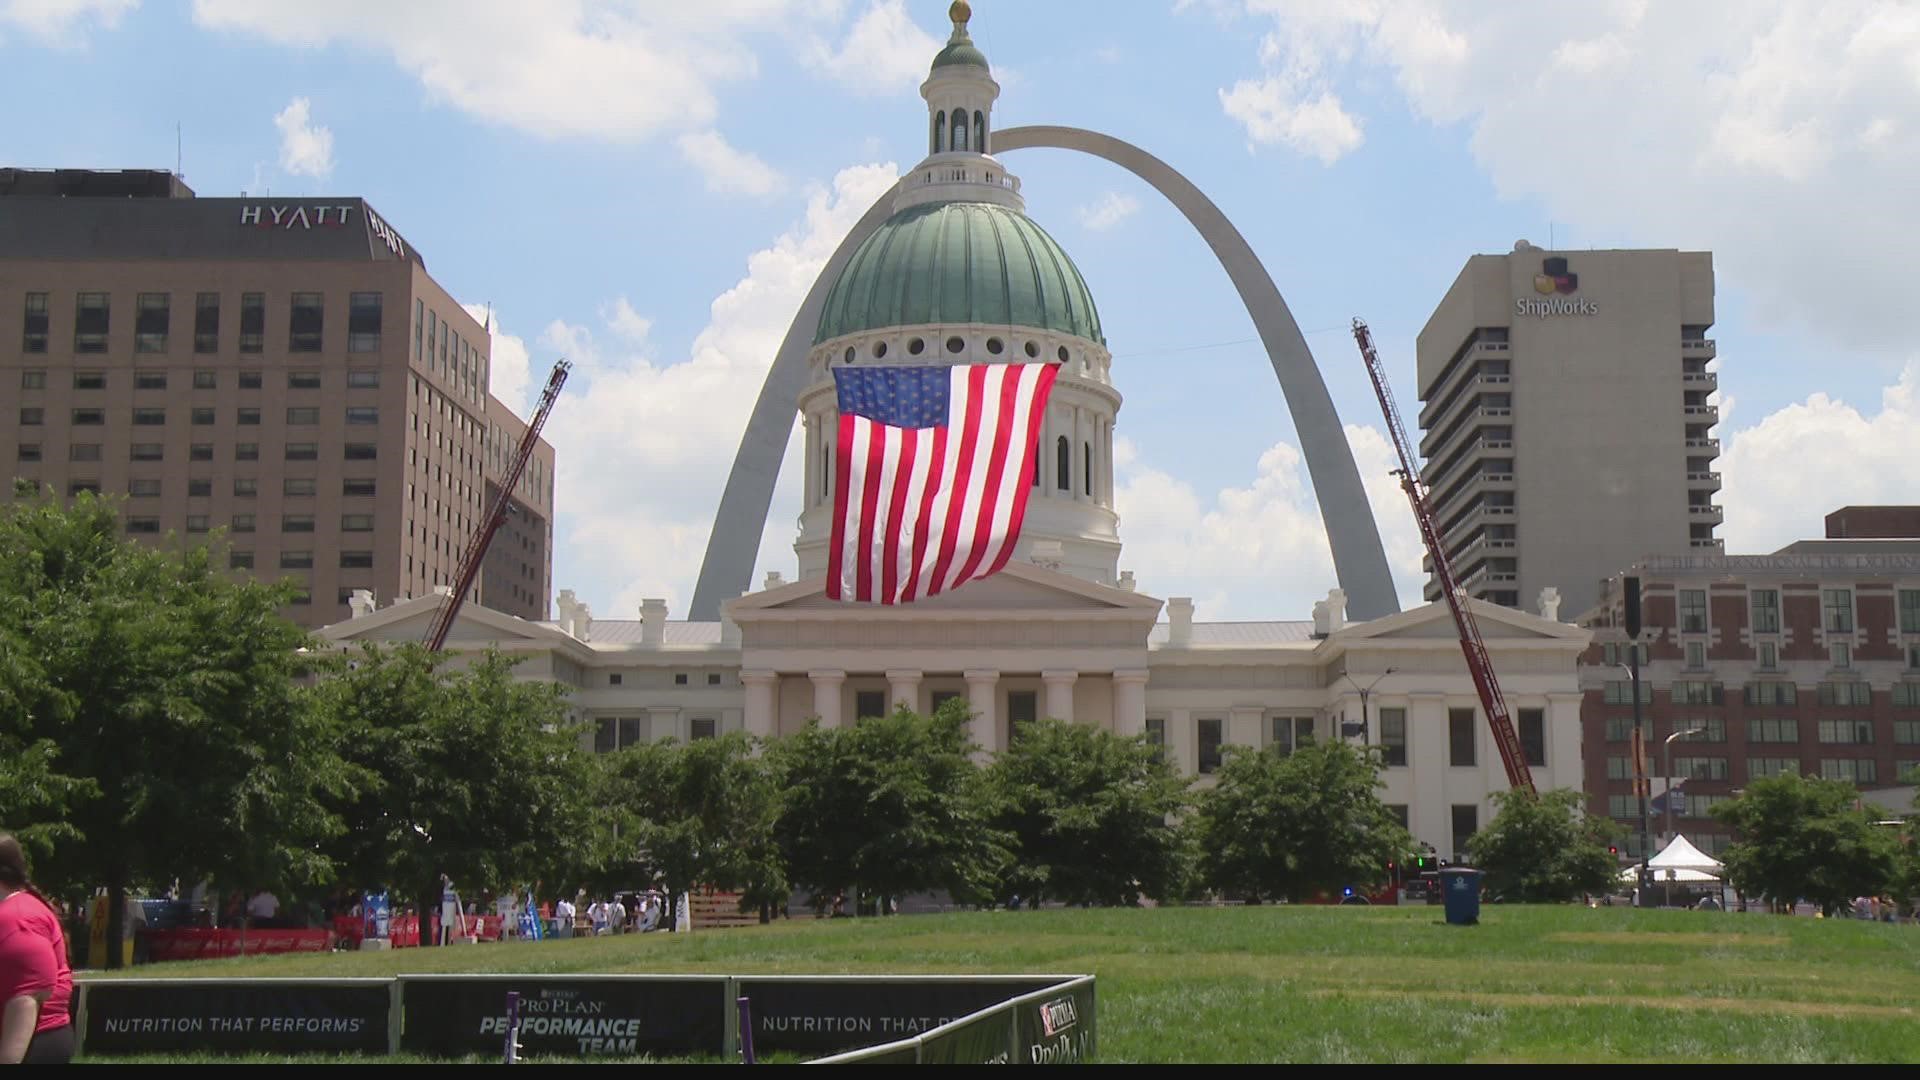 Police and fire departments were well-staffed at Fair Saint Louis event to keep everyone safe during America's birthday.